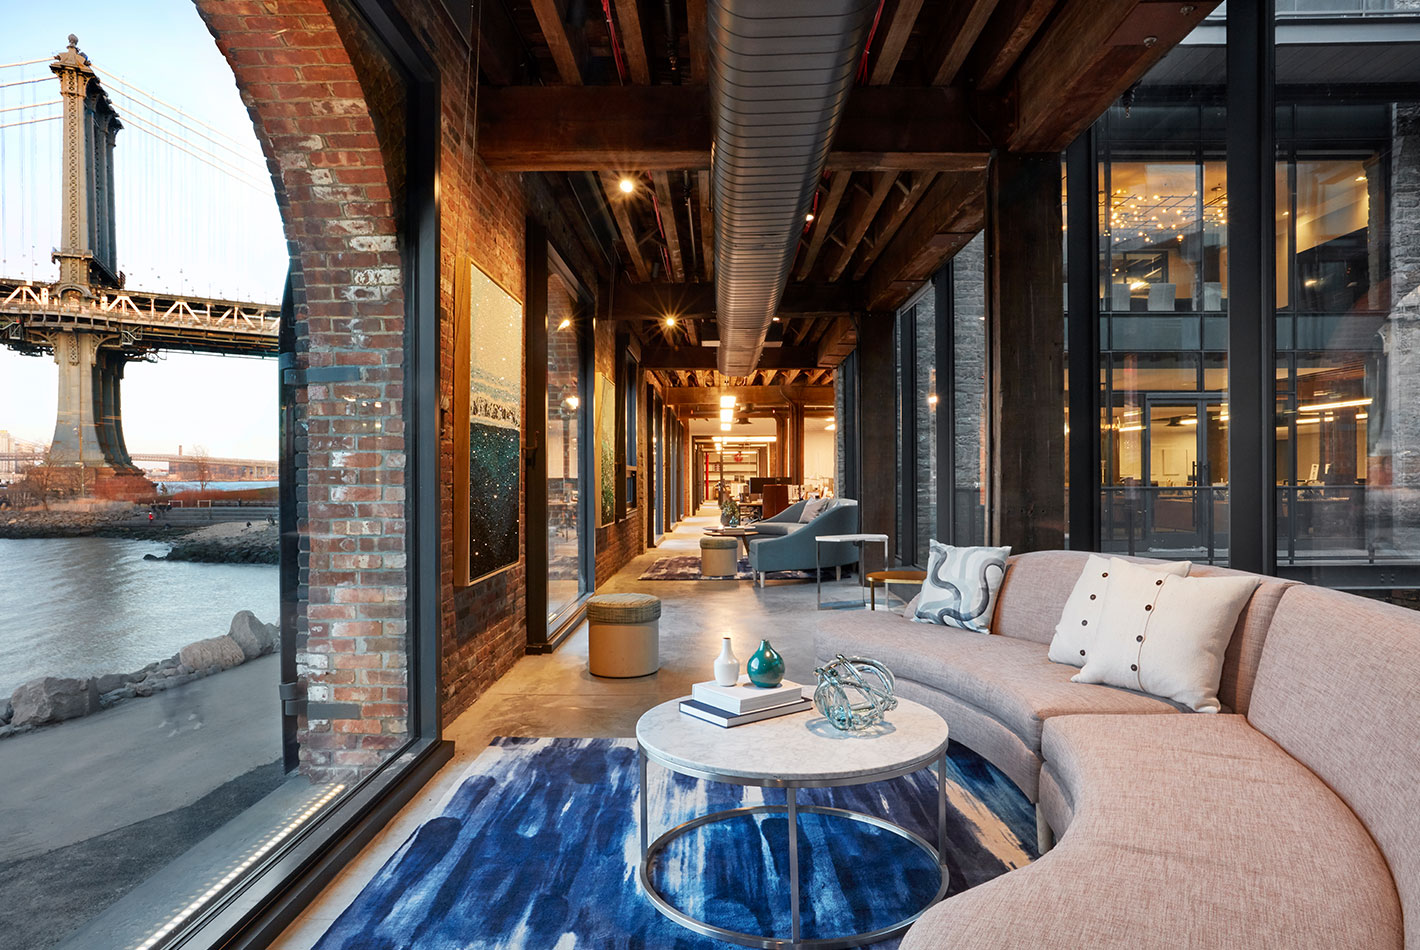 A long corridor with arched windows facing the Manhattan Bridge is used for multiple seating areas perfect for casual meetings at West Elm Headquarters.